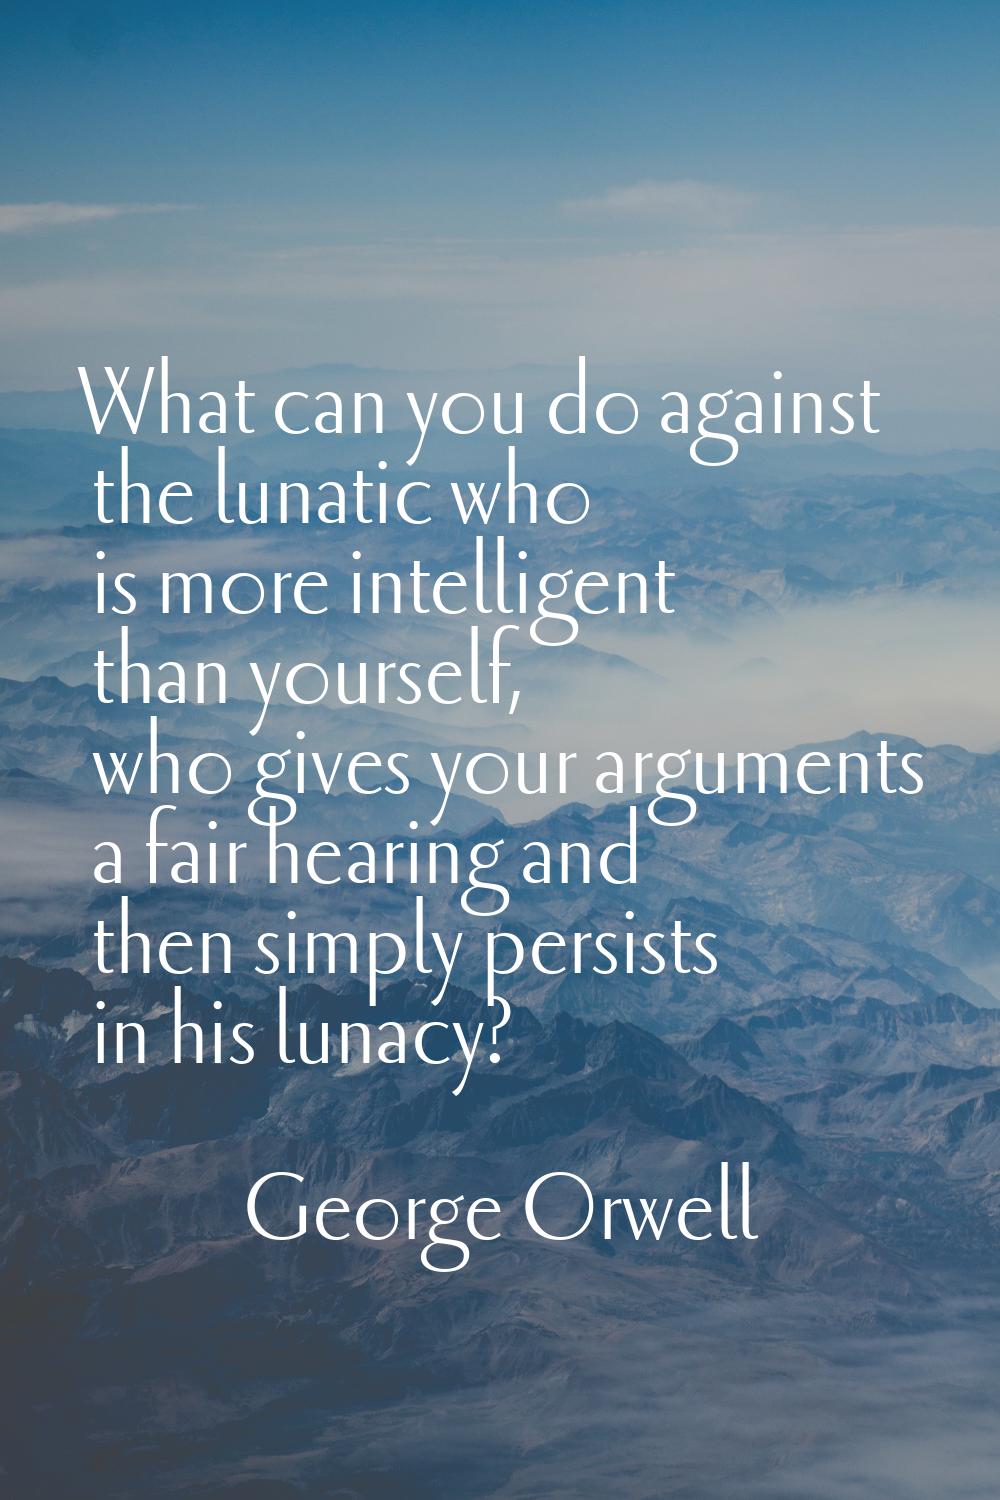 What can you do against the lunatic who is more intelligent than yourself, who gives your arguments